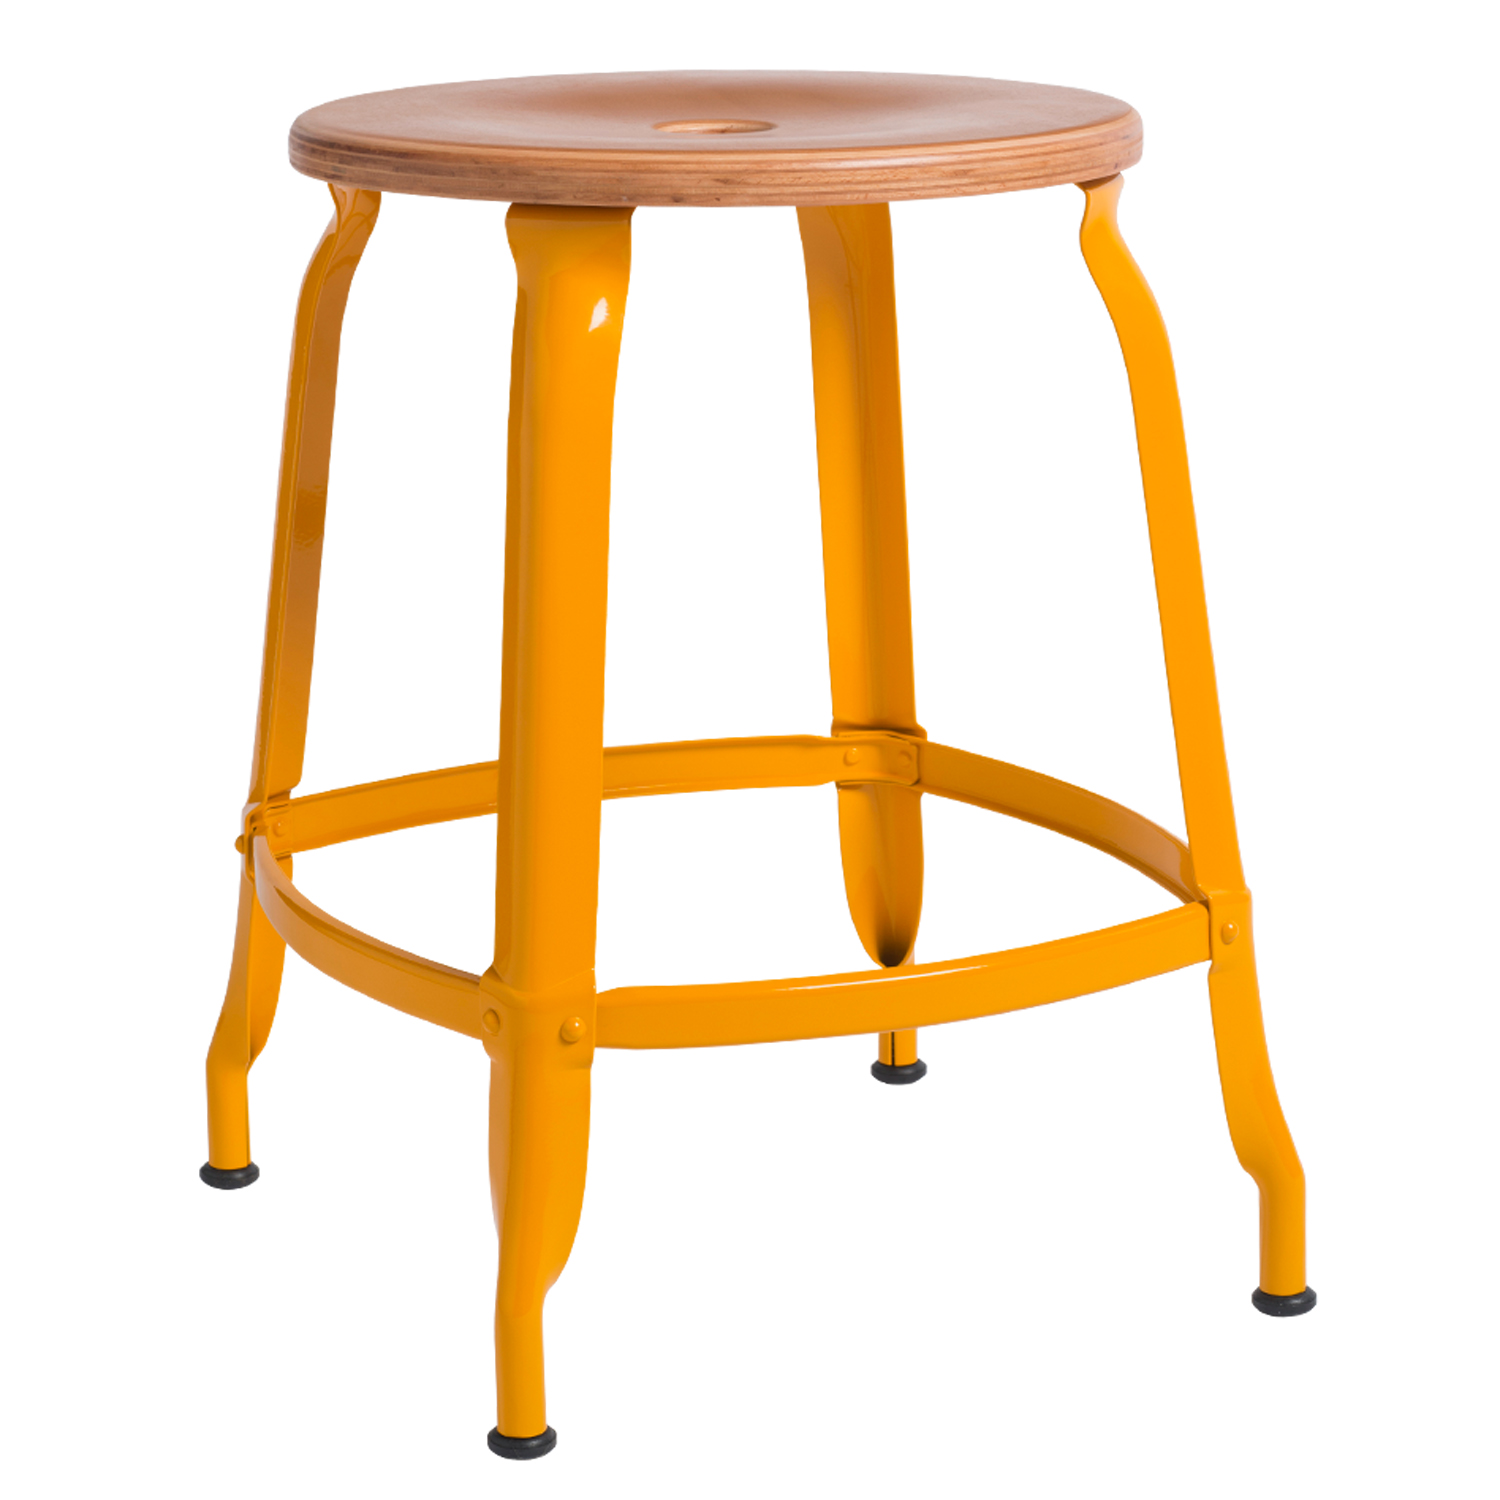 CHAISES Nicolle Hocker natural narzissengelb Sitzhöhe 47cm Holz natural und Metall Glossy Daffodil Yellow